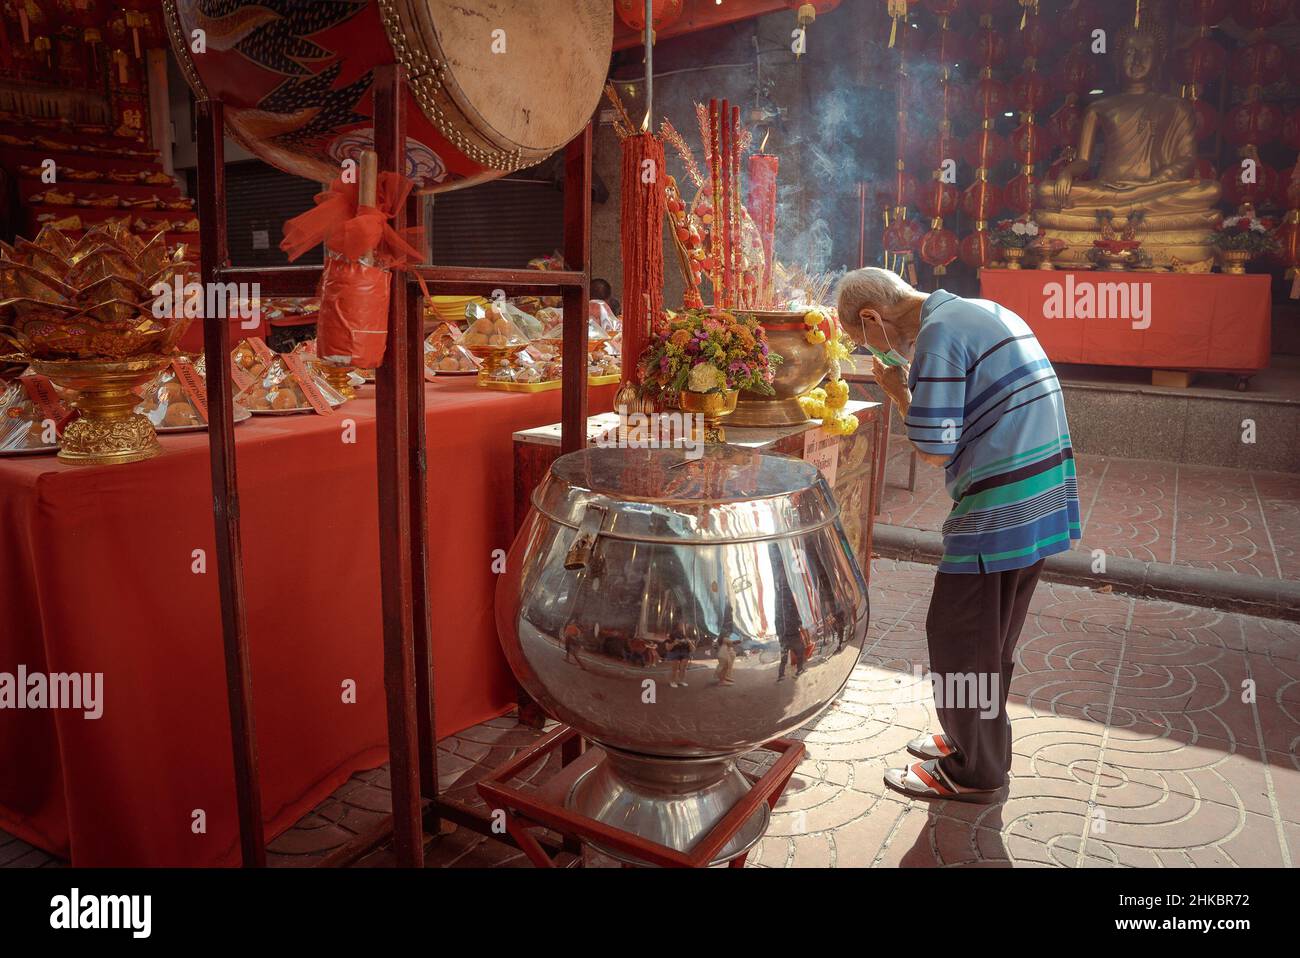 A man bows in prayer outside a shrine with offerings laid out.The Lunar New Year in Bangkok this year is a more solemn affair than in previous years. The government had technically canceled large celebrations, but in Chinatown, a troupe of lion dancers slowed down oncoming traffic on Yaowrat road. On a side street at Wat Lokanukroh, the only excitement for the day was the outbreak of a small fire caused when large lit red candles collapsed on one another; custodians rushed for a fire extinguisher. Many Thais of Chinese descent continued to perform rites and prayers at the shrine undisturbed. Stock Photo